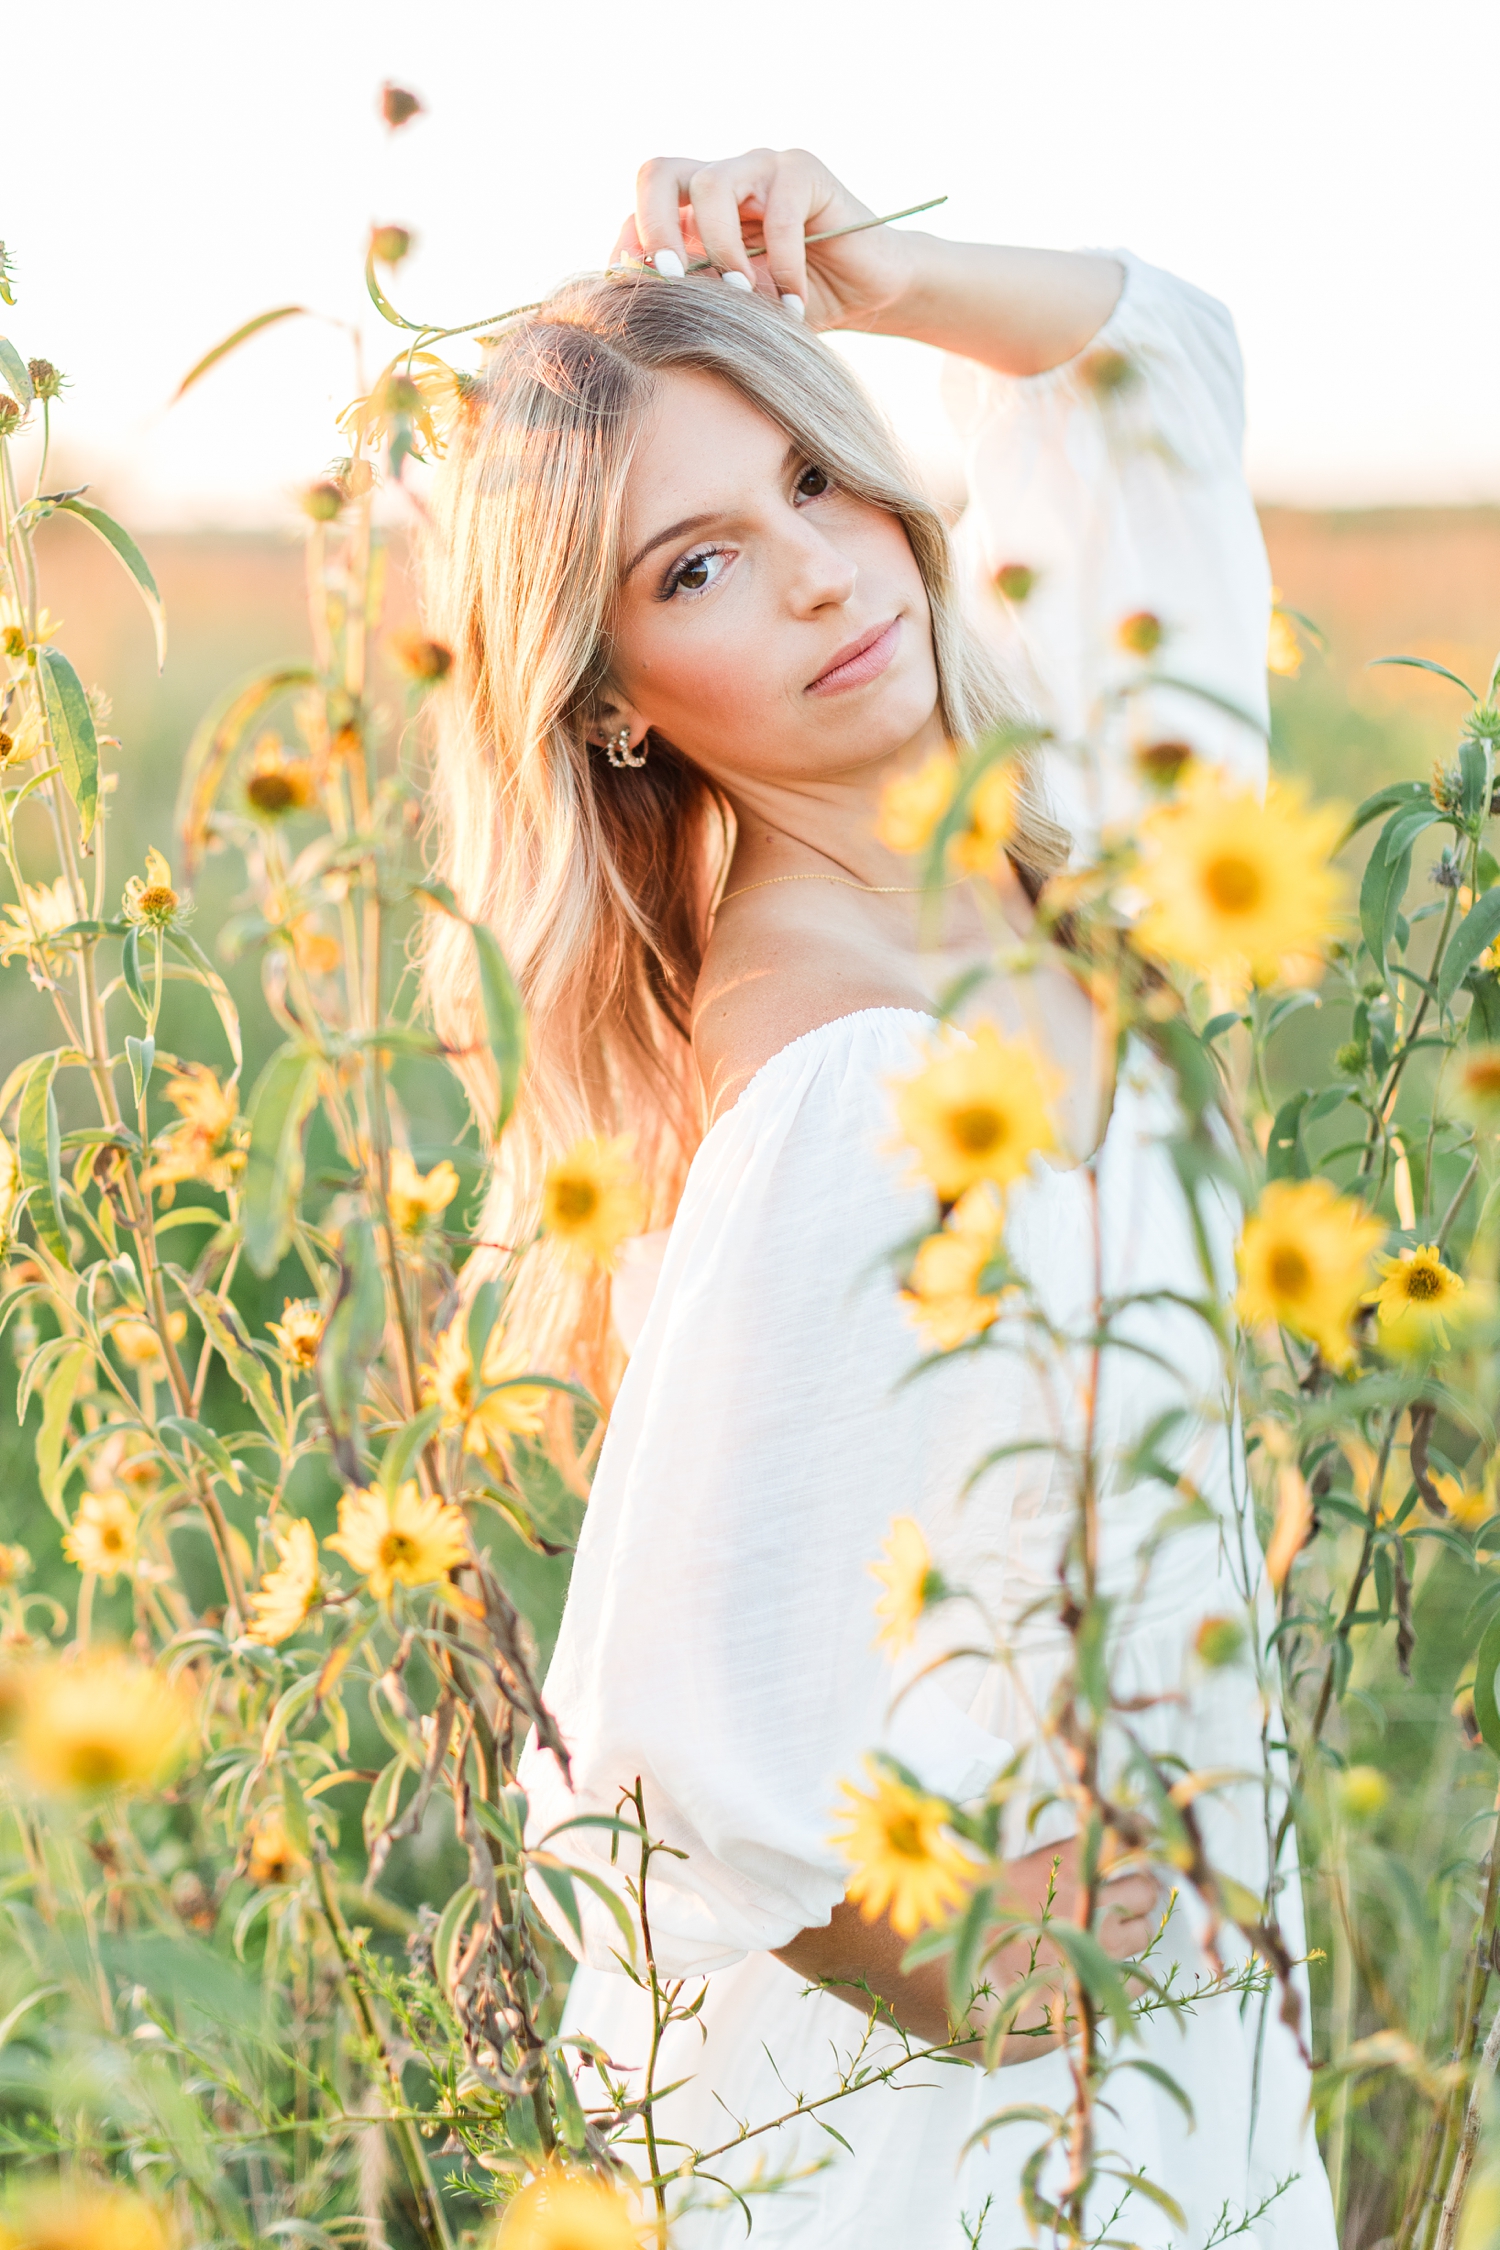 Eden stands in a wildflower field at golden hour wearing a white dress | CB Studio